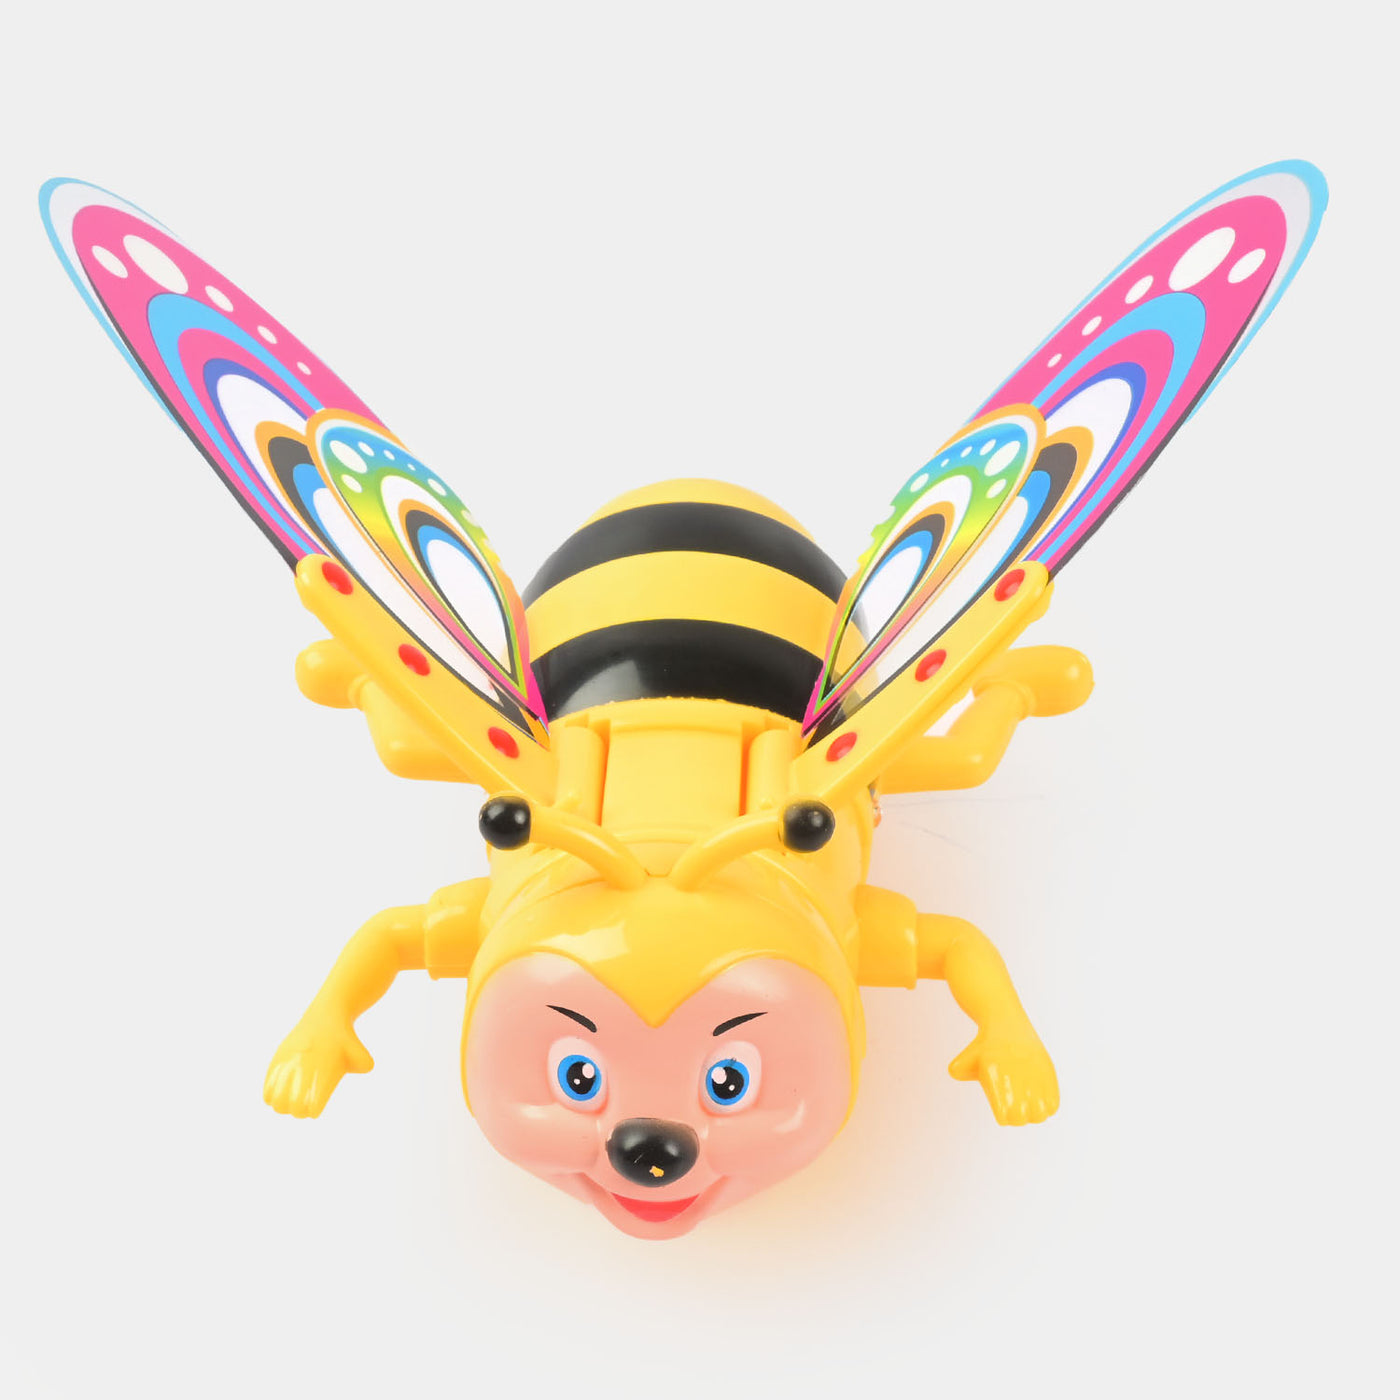 Little Bee Electric Function Musical Toy For Kids